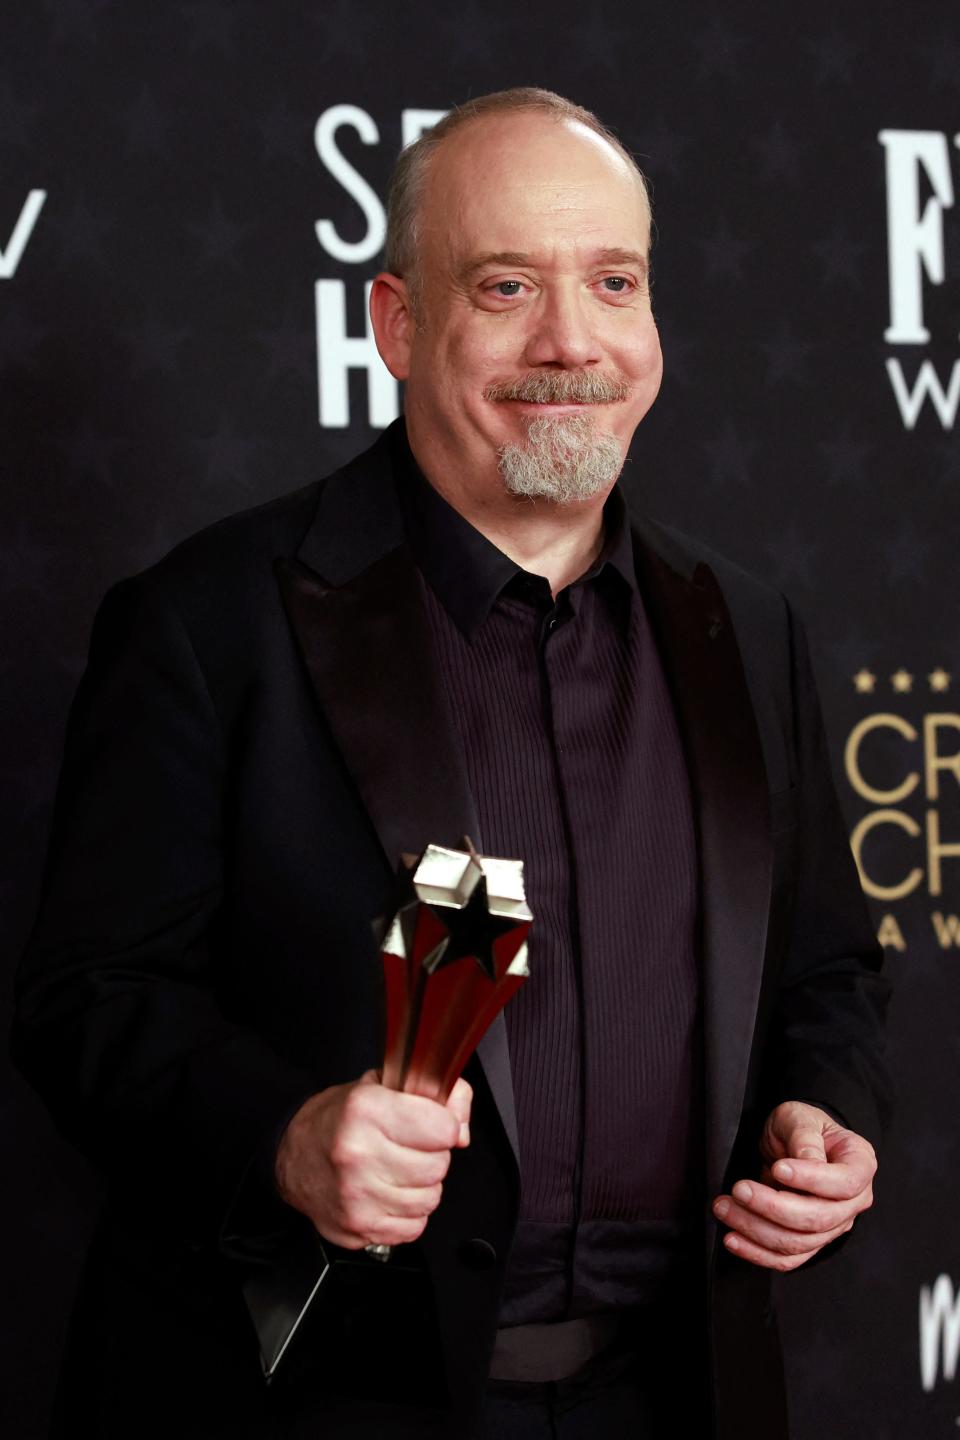 Paul Giamatti, winner of the Best Actor award for "The Holdovers," poses in the press room during the 29th Annual Critics Choice Awards at the Barker Hangar in Santa Monica, California.